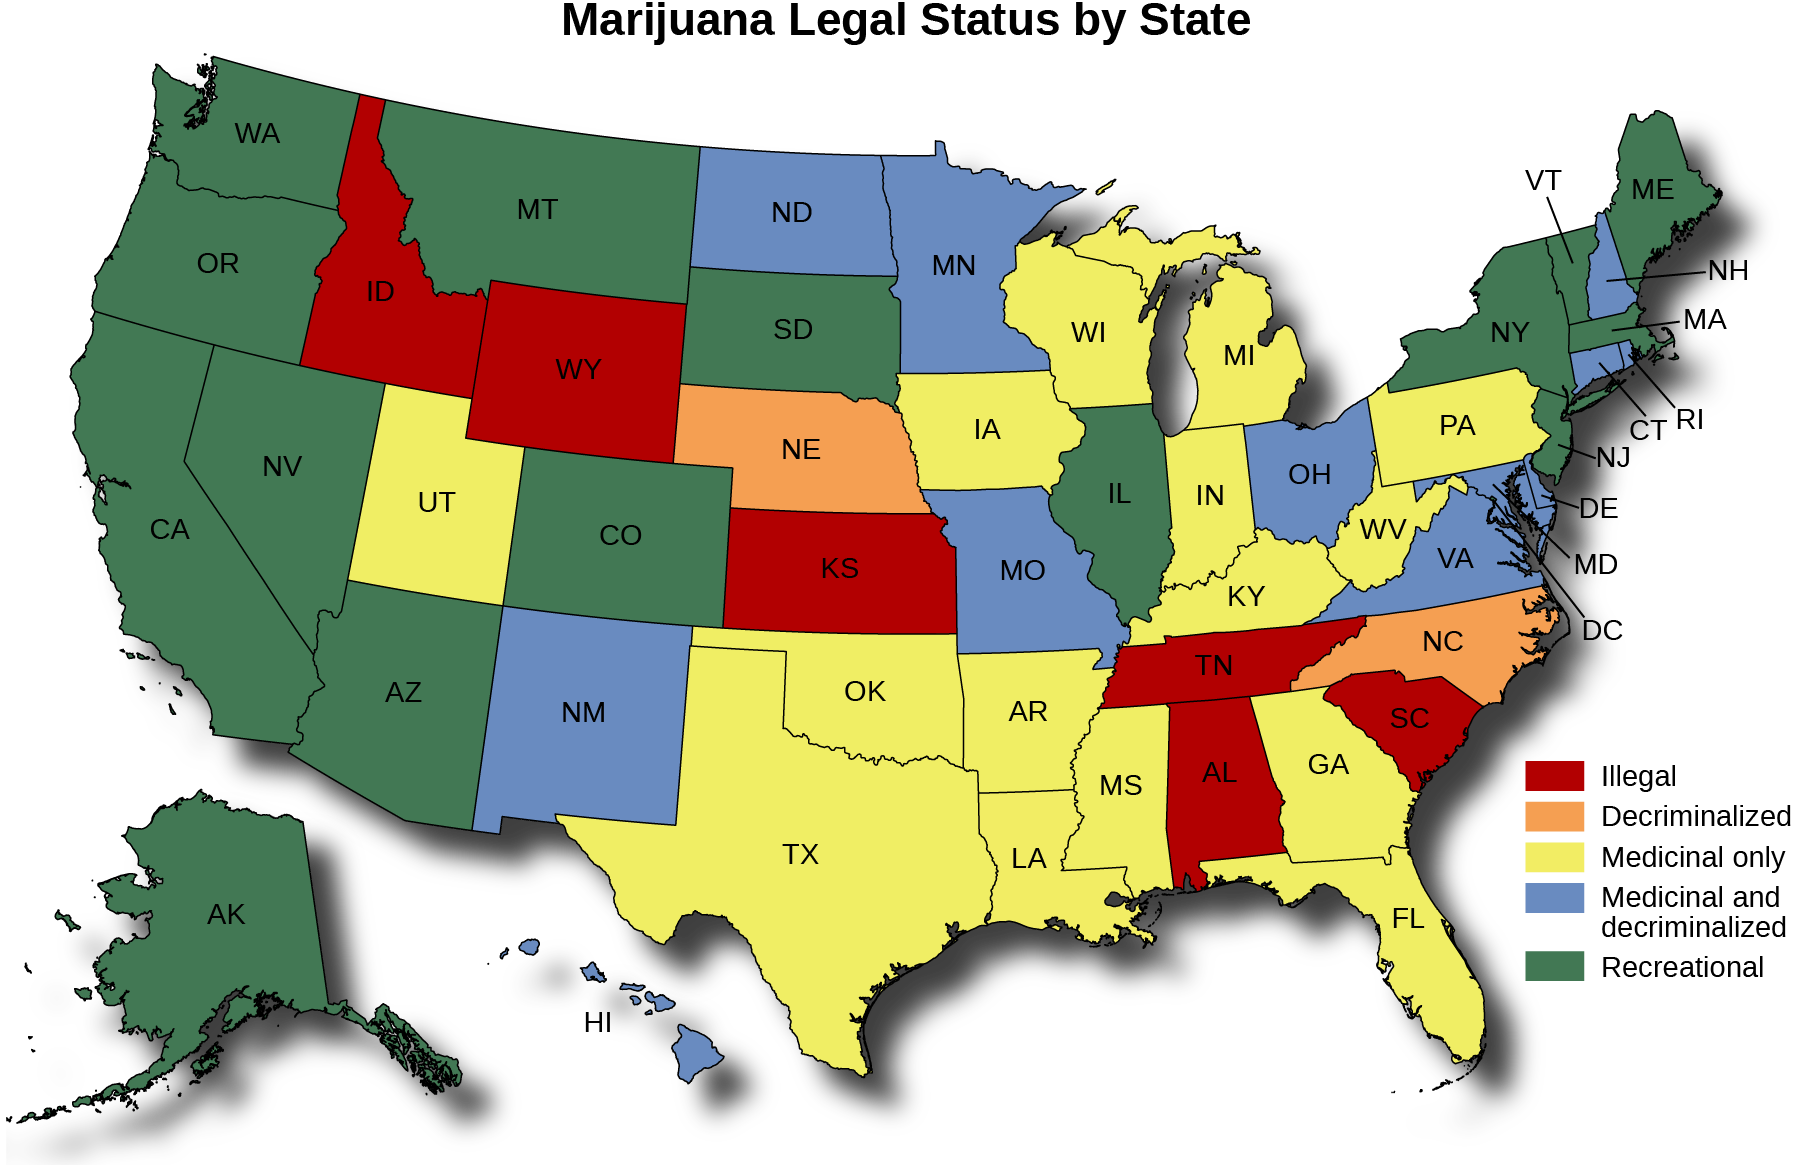 Map depicting the legal status of marijuana by state.